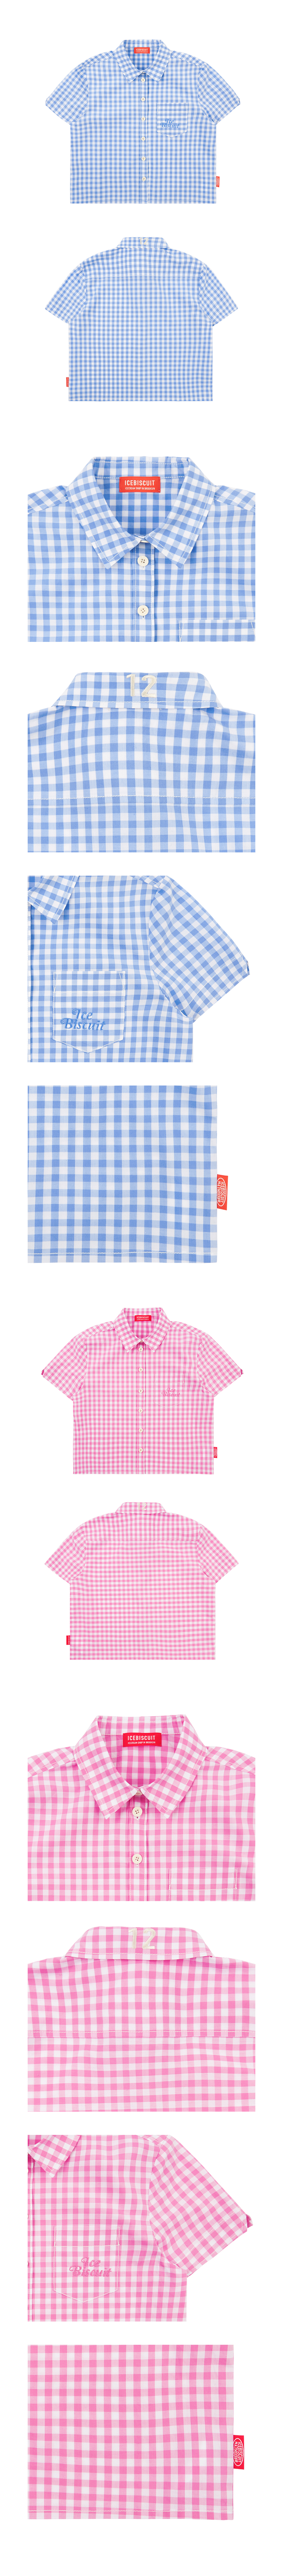 Icebiscuit embroidery point check shirt 상세 이미지